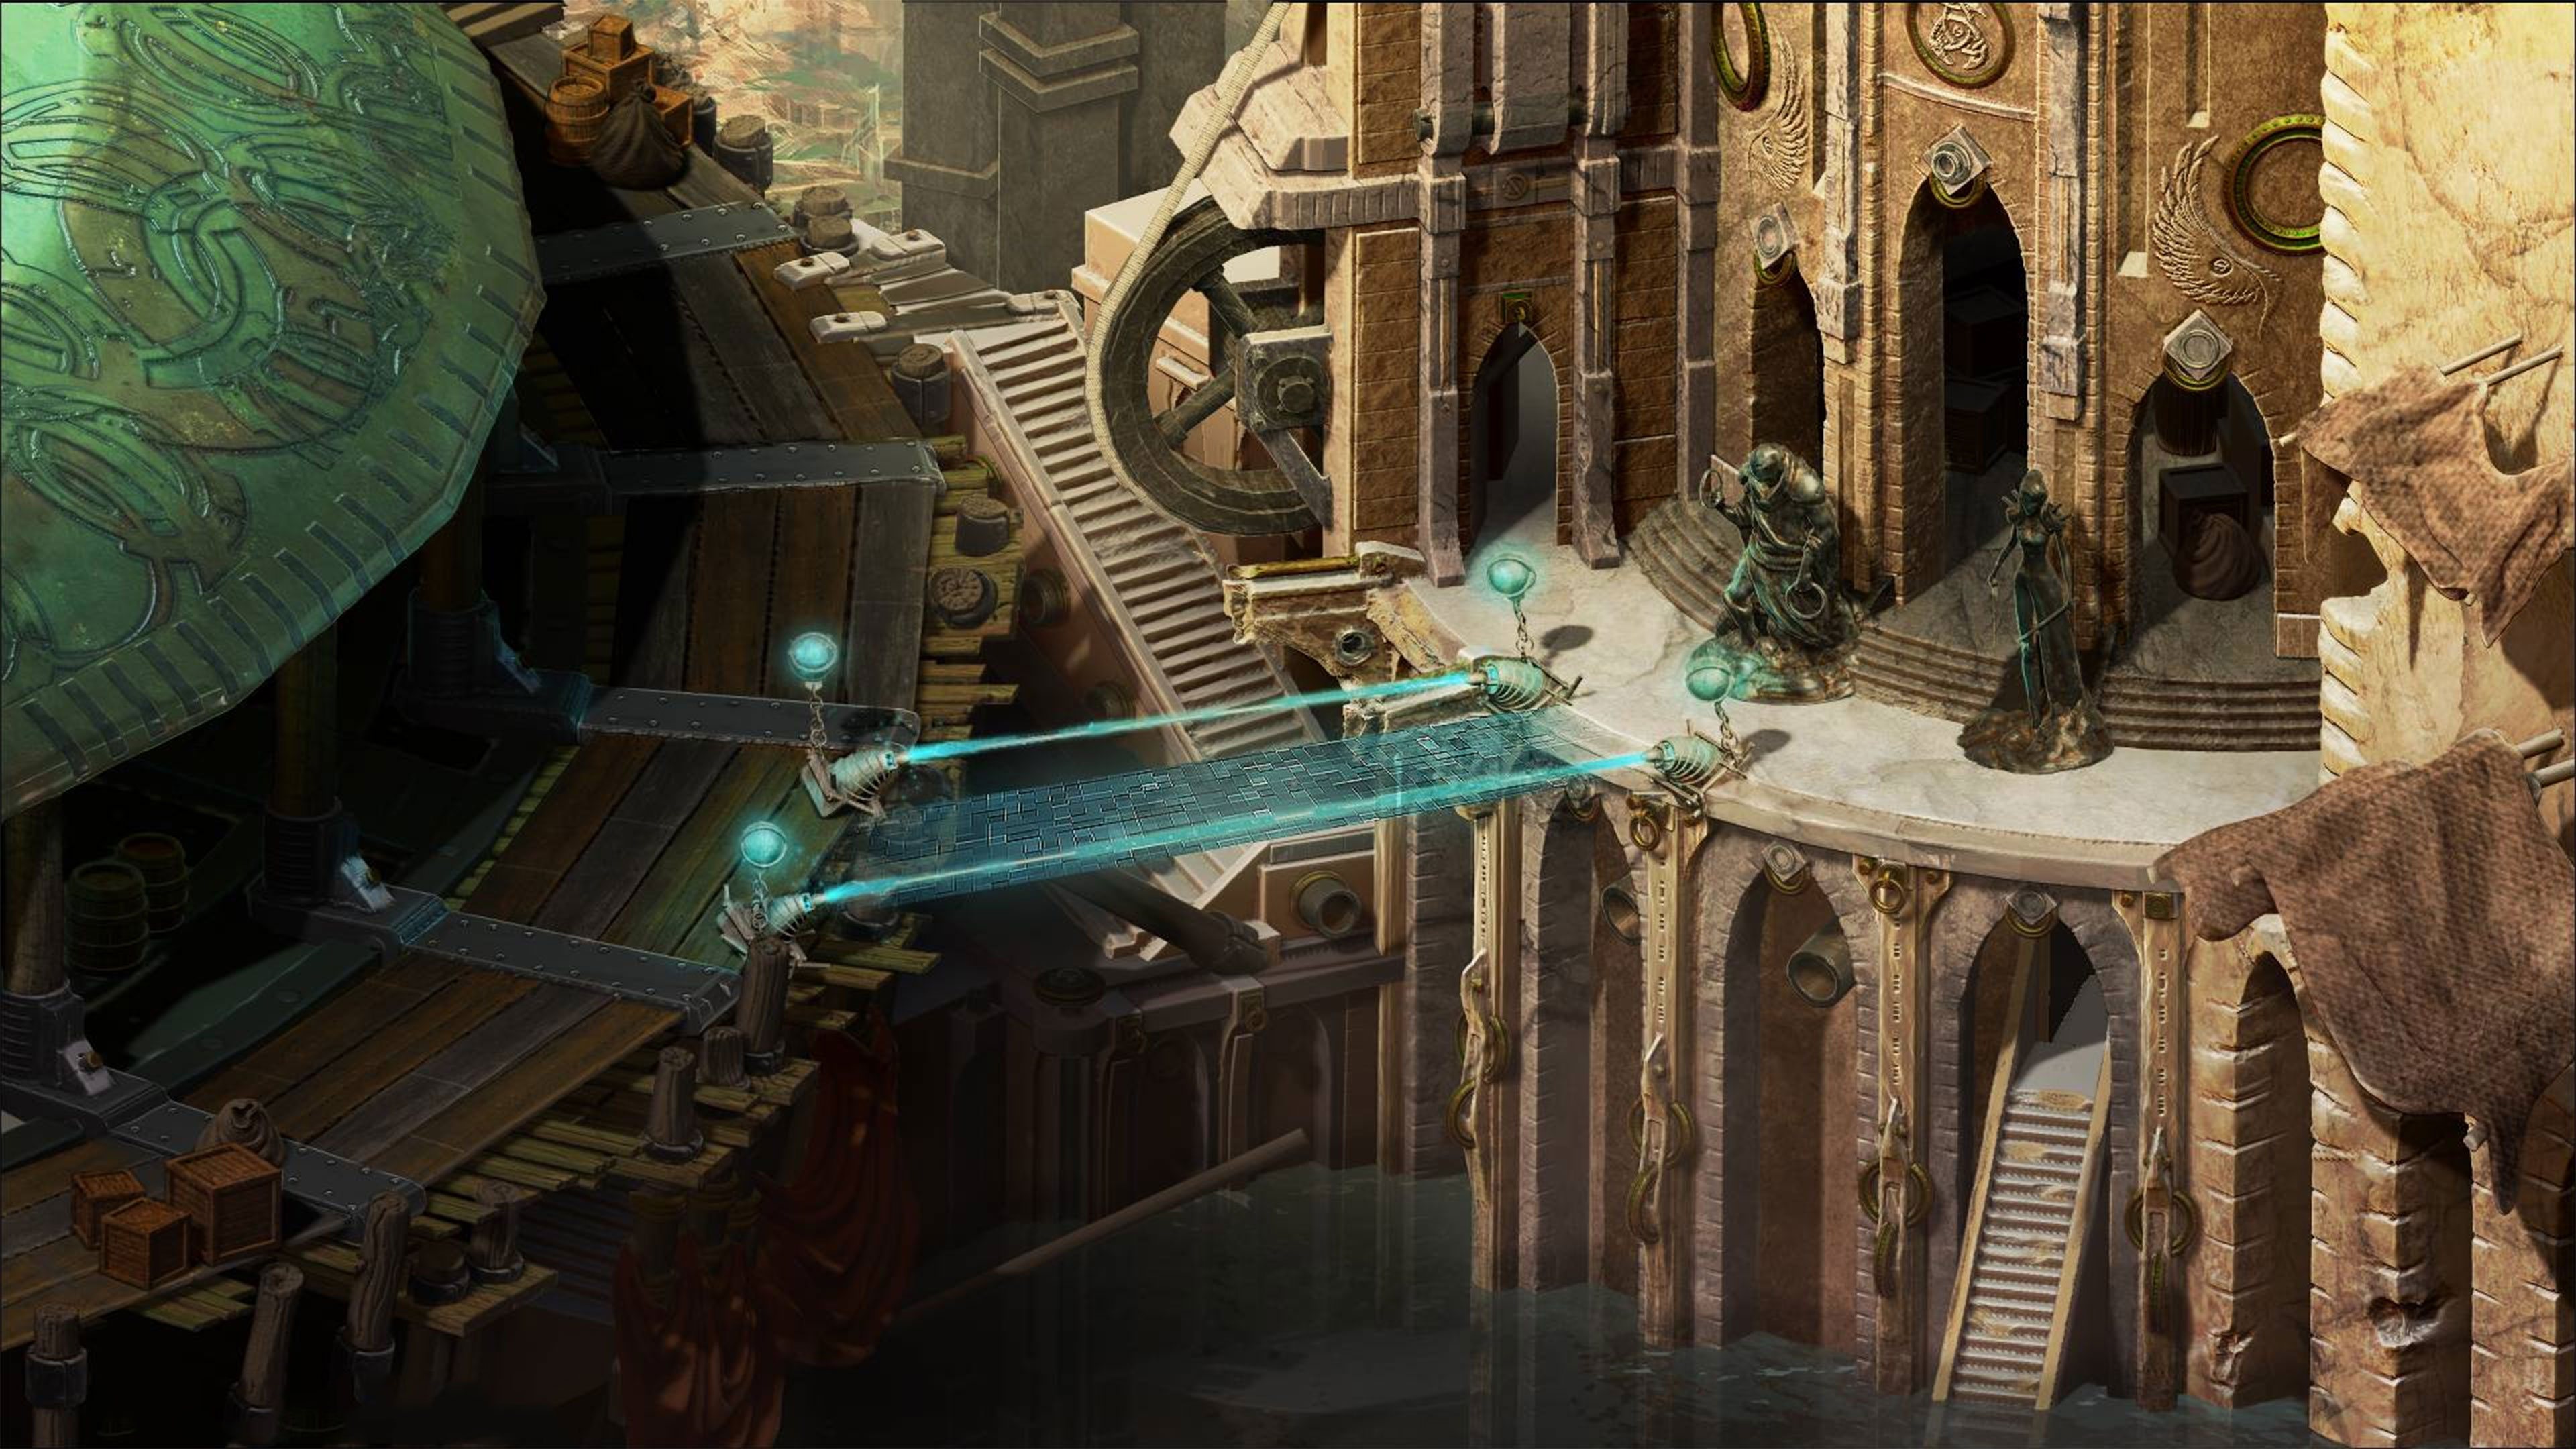 Torment: Tides Of Numenera Wallpapers